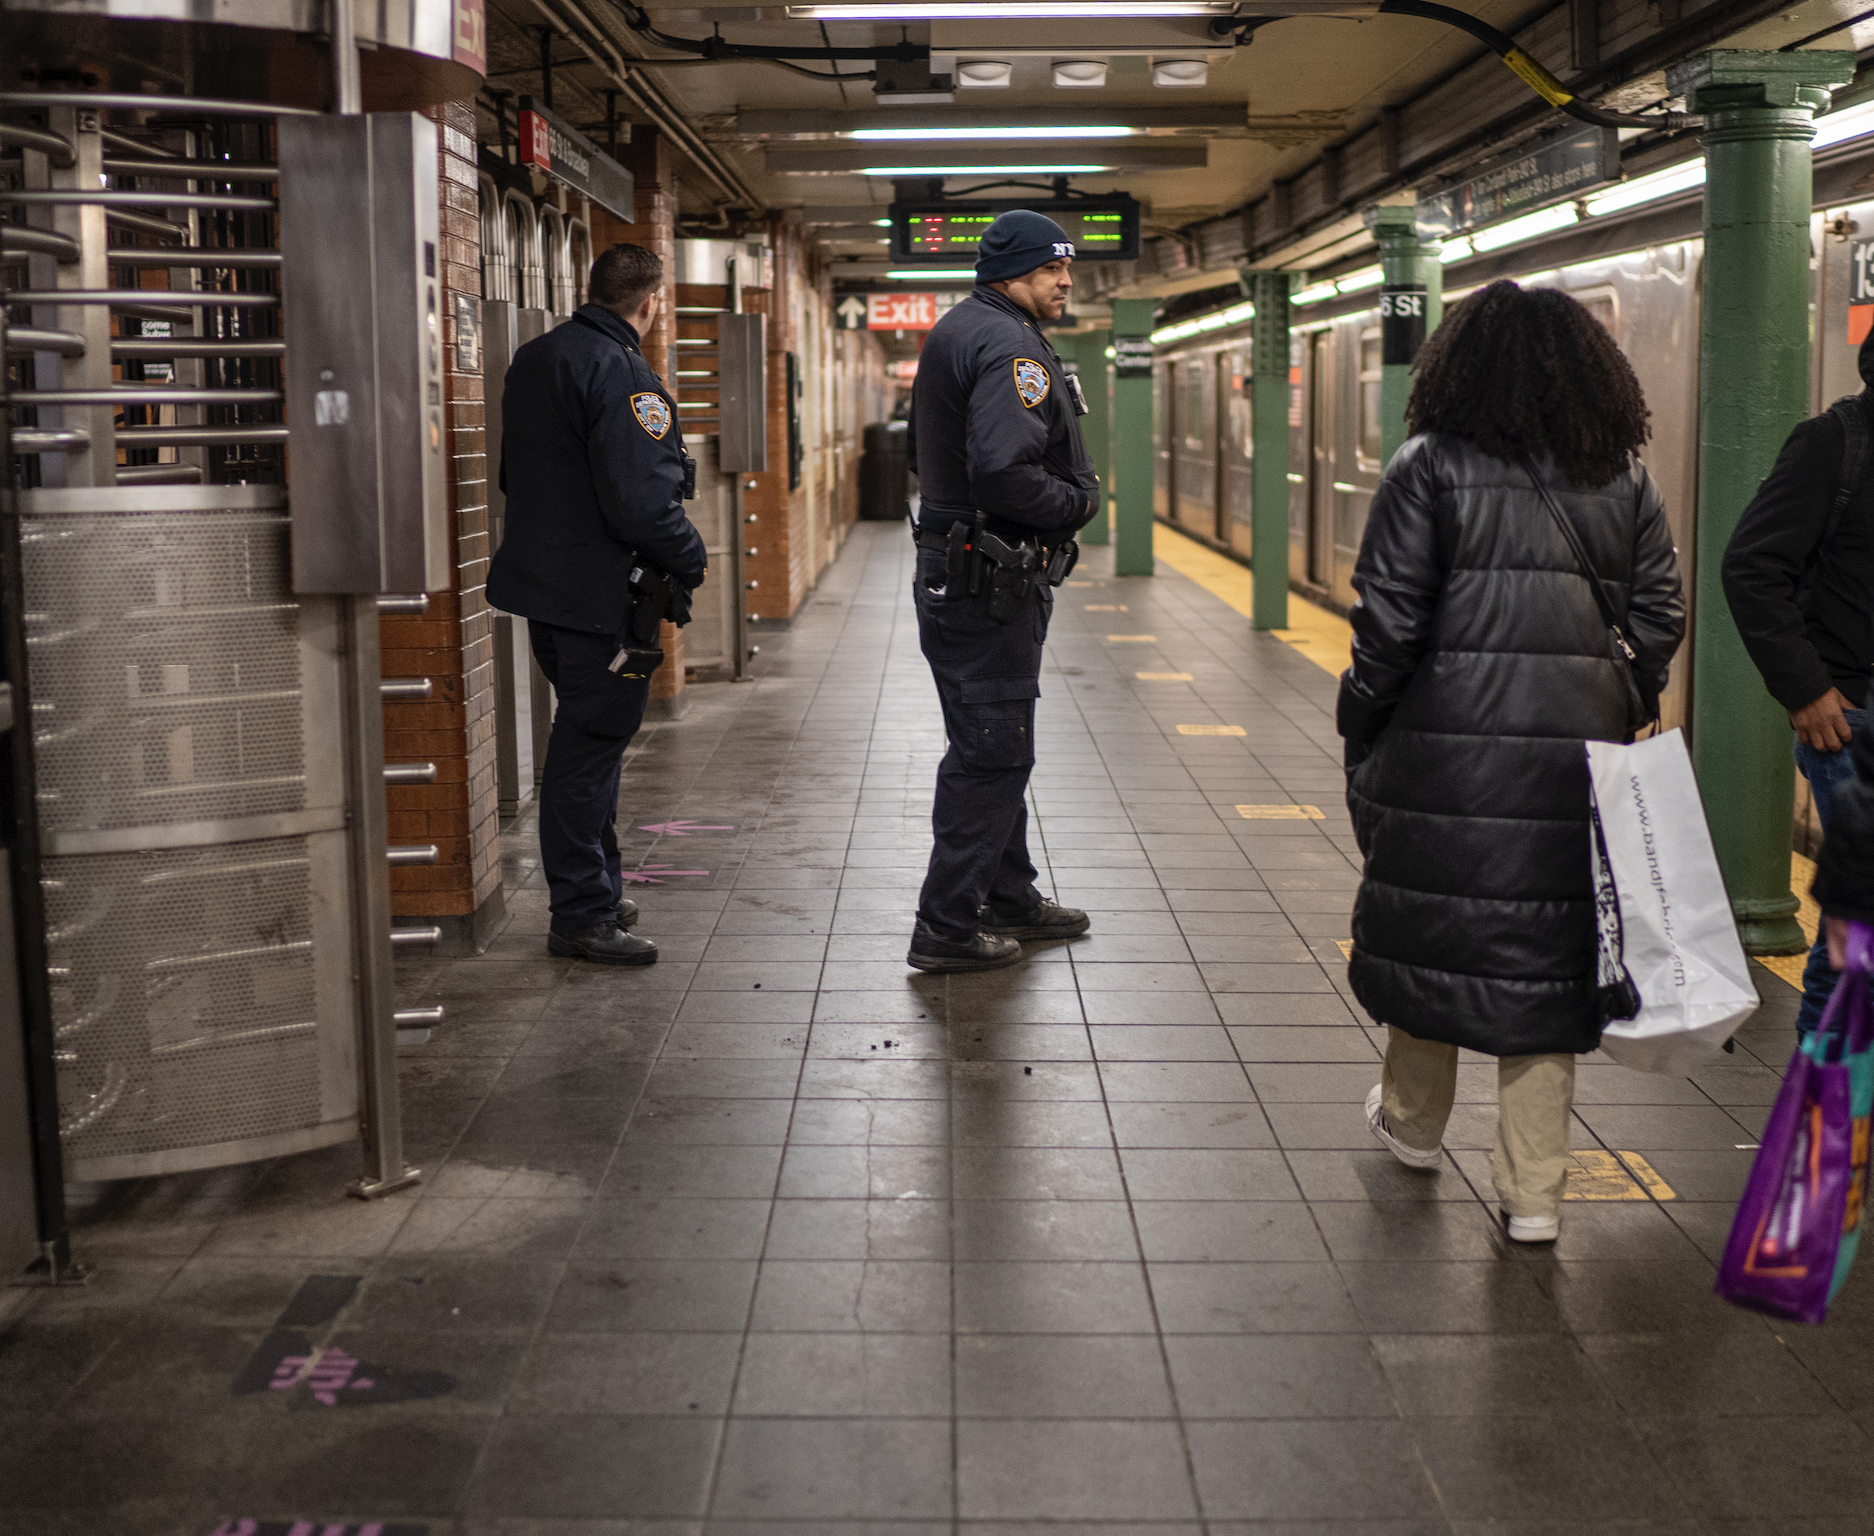 A stock image of police officers on a subway platform.